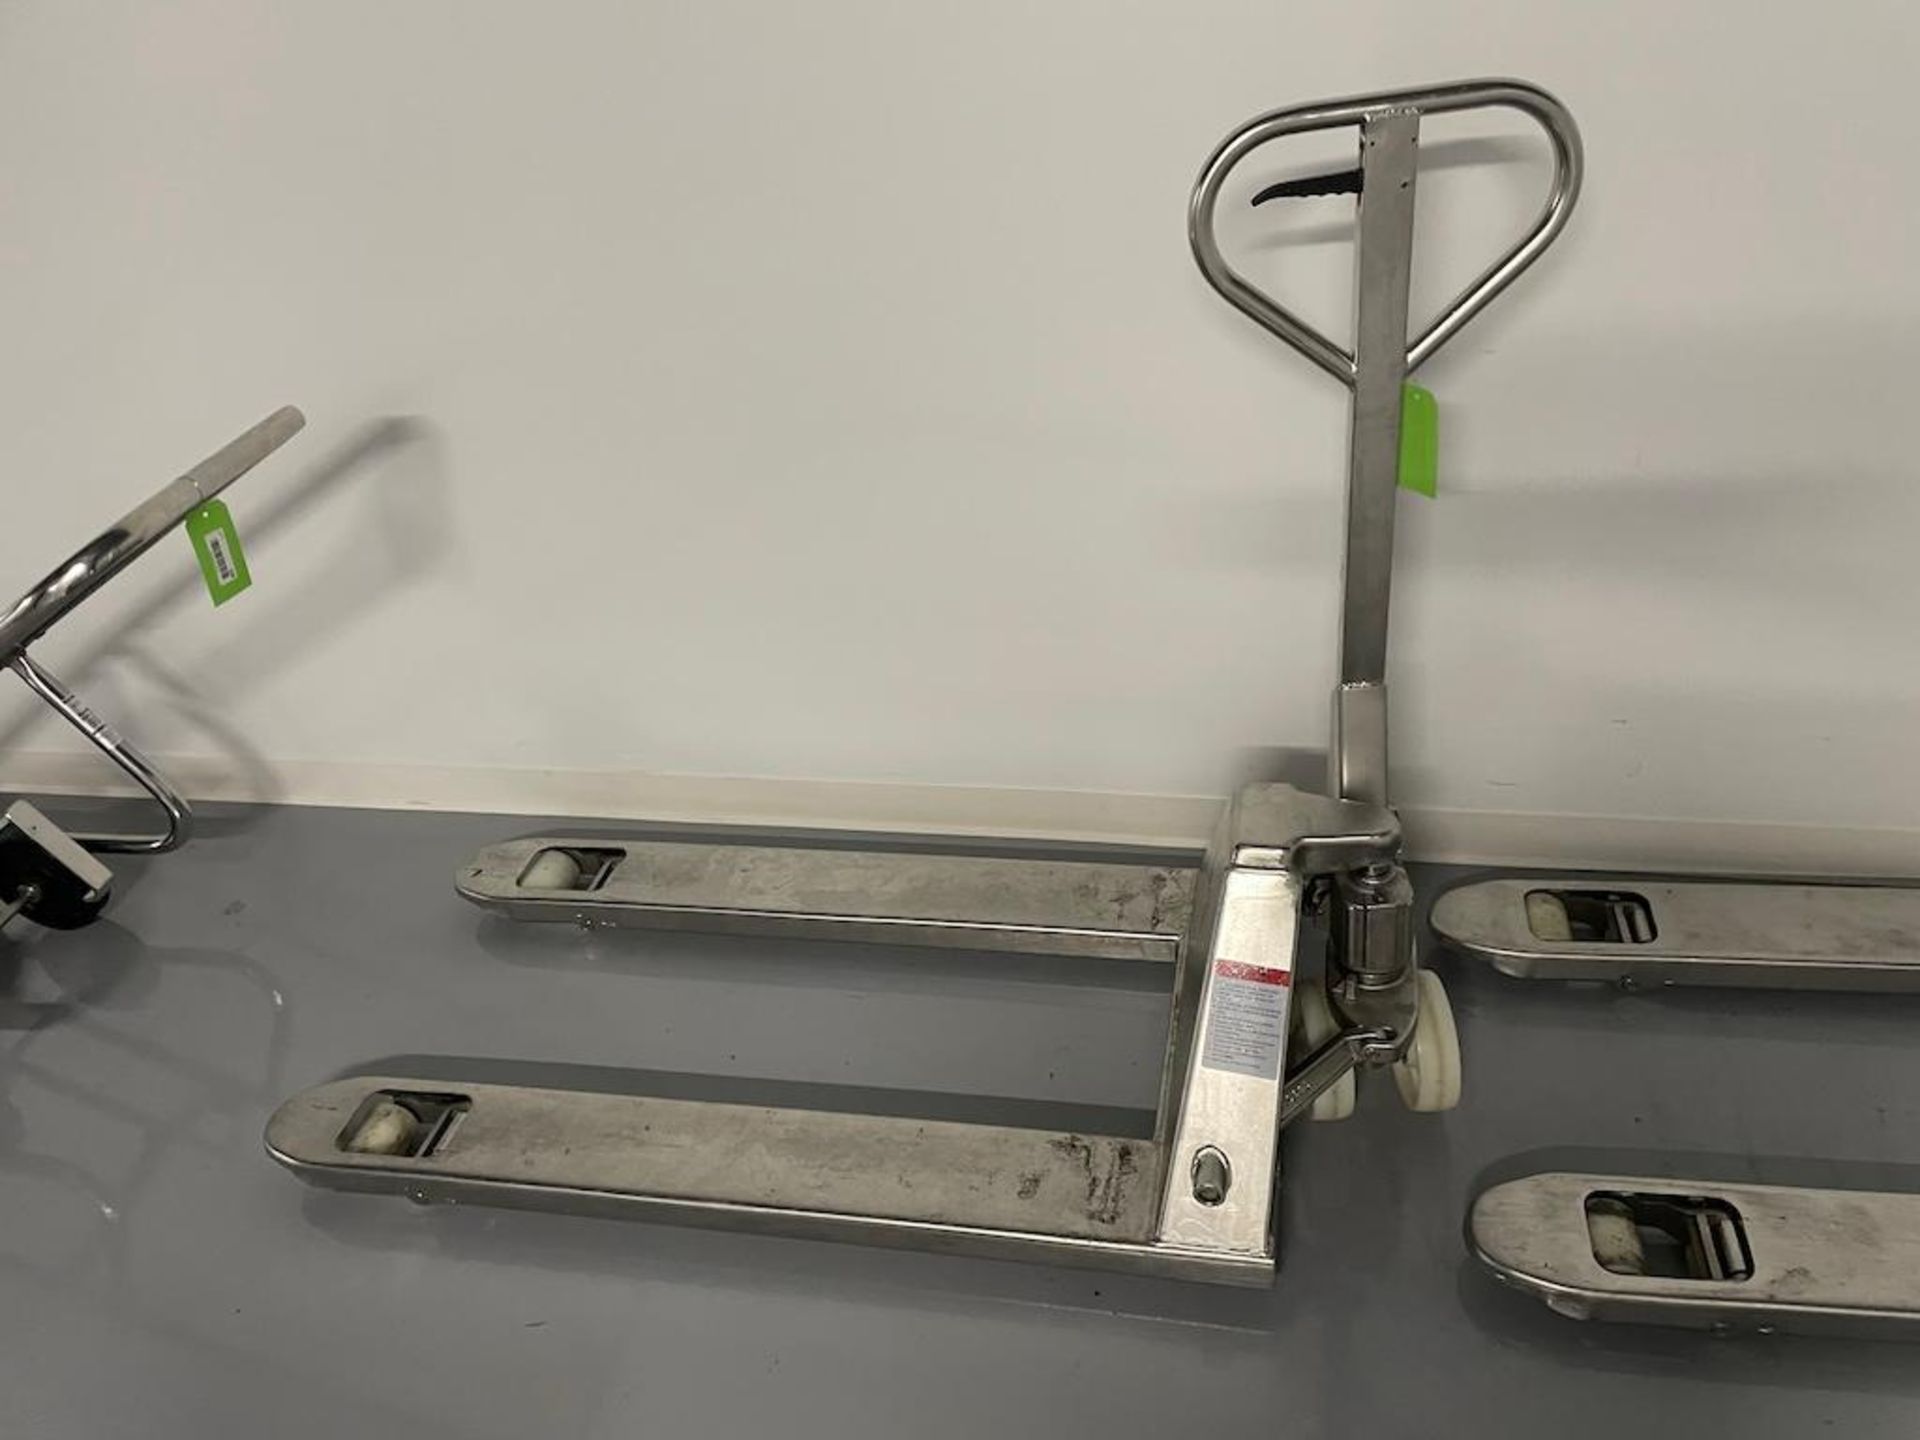 STAINLESS STEEL PALLET JACK, 5500 LB CAPACITY [2ND FL LOADING AREA]